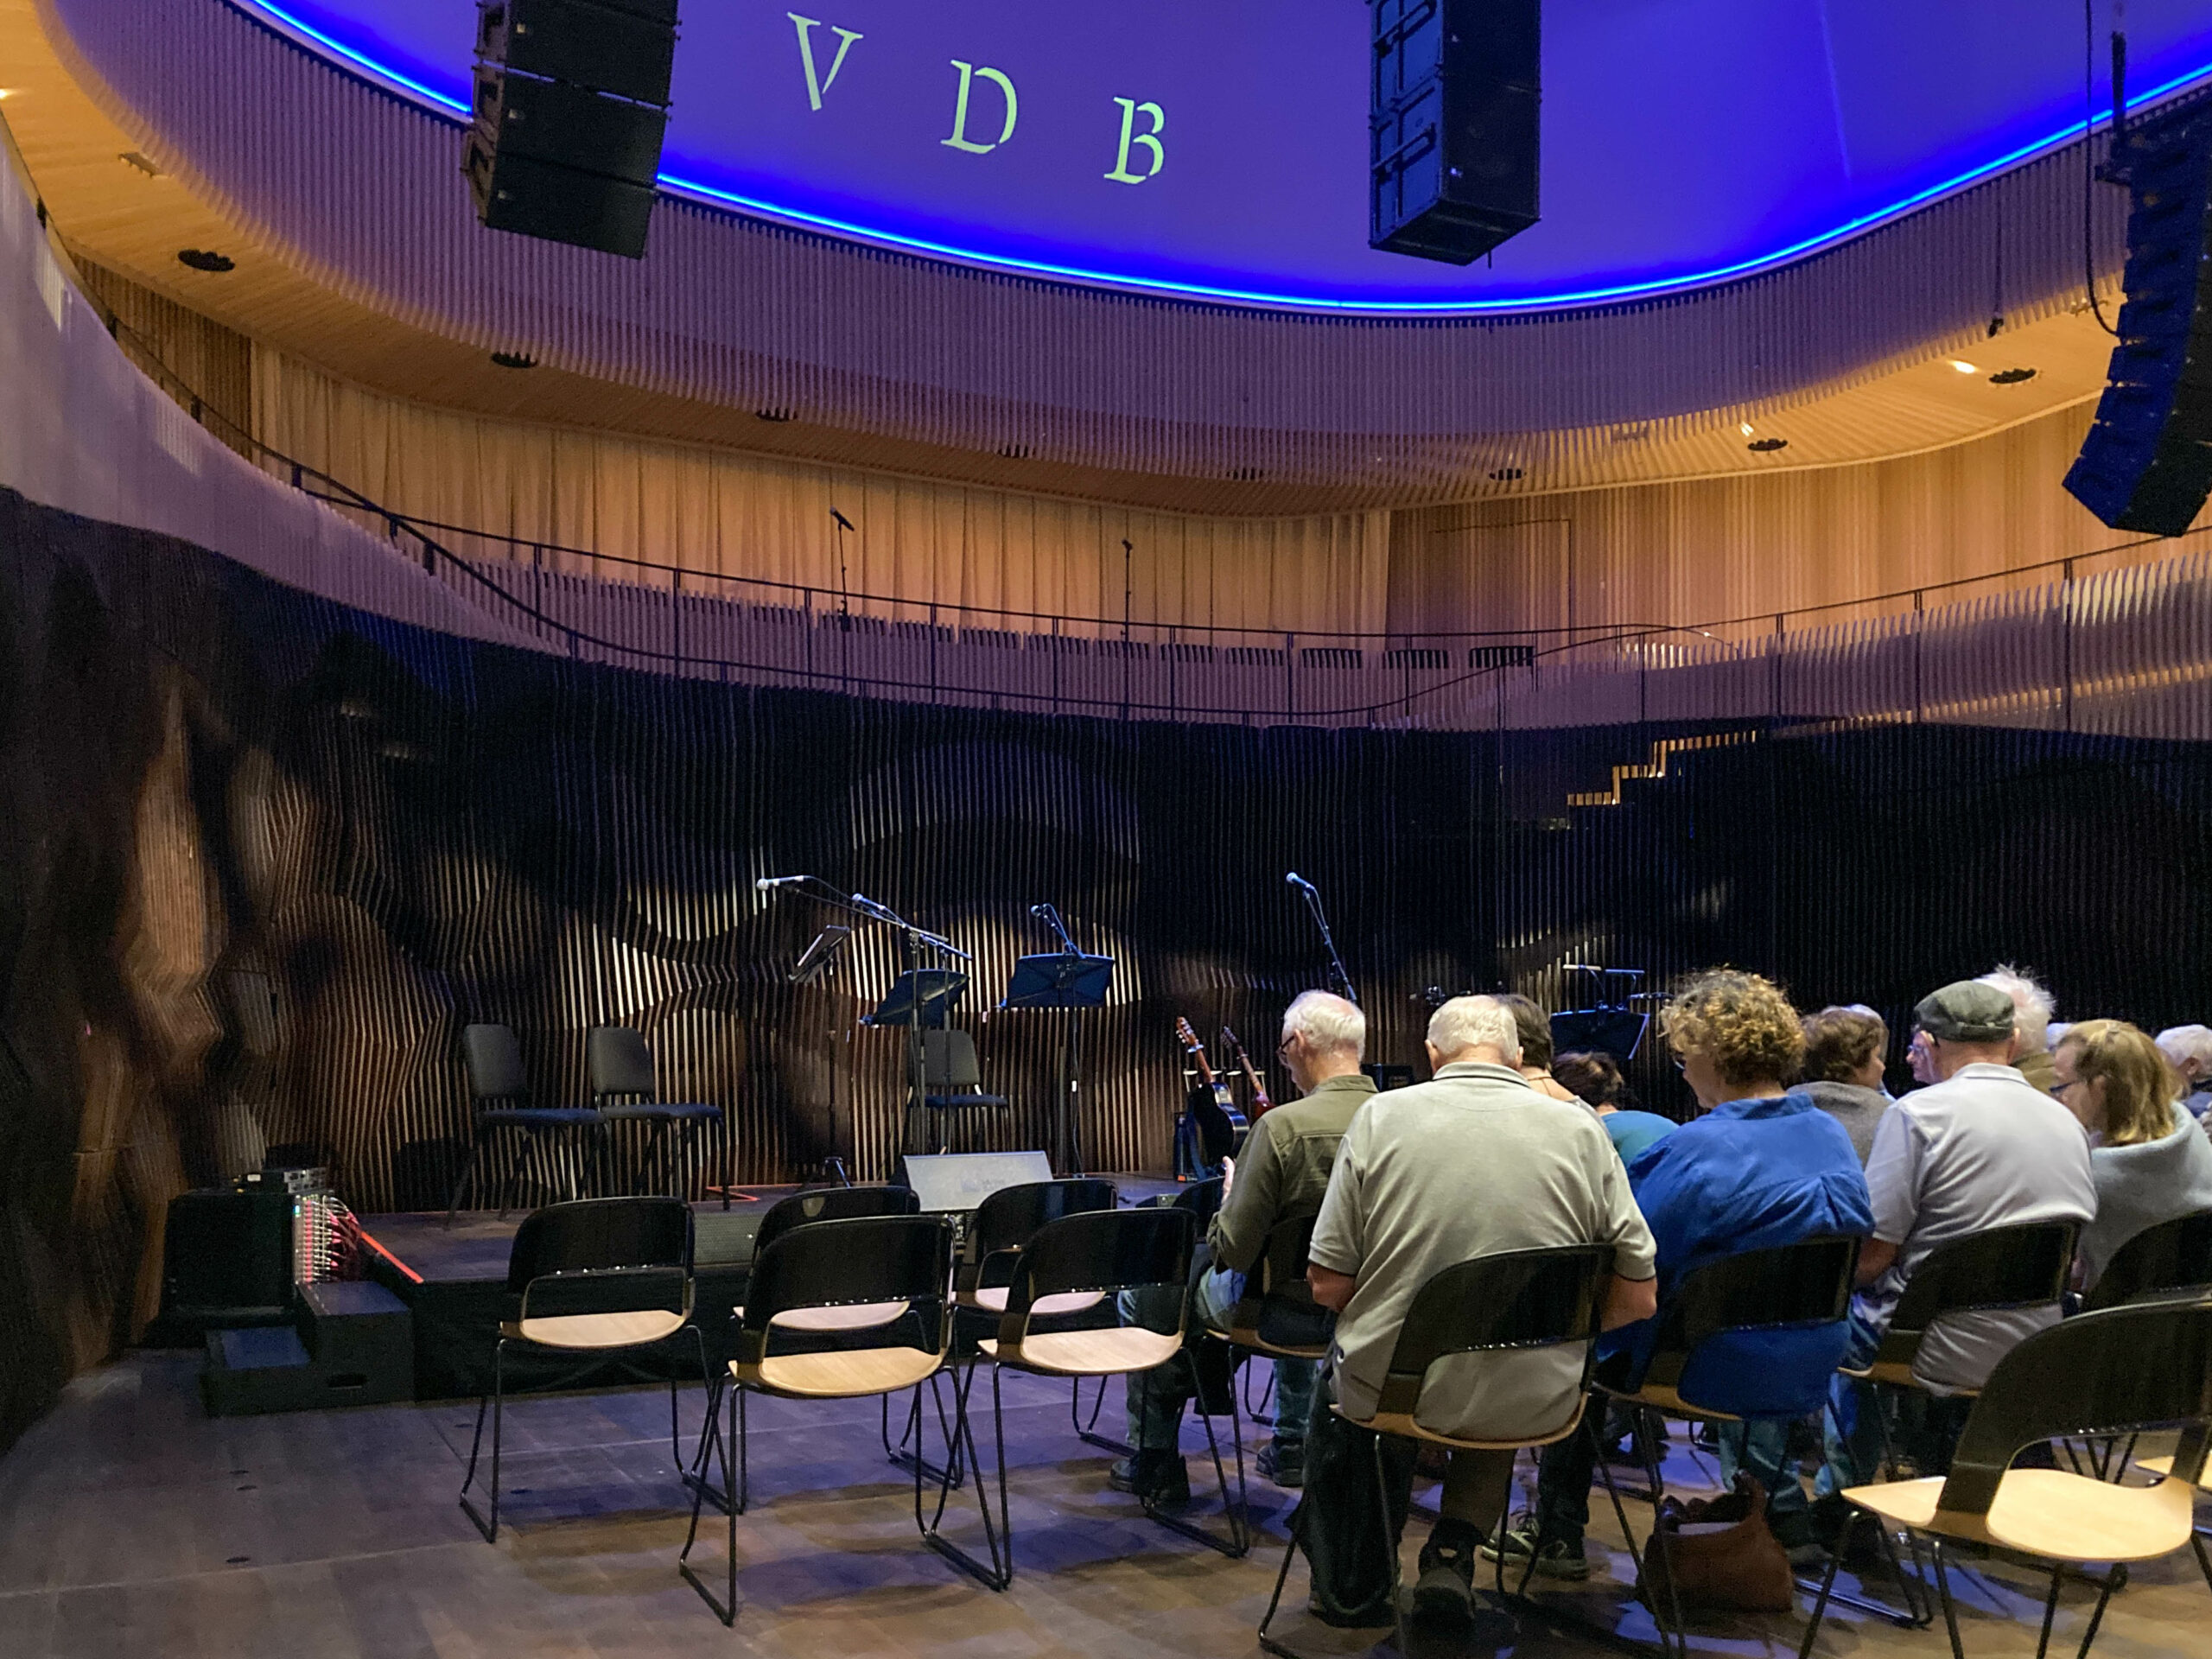 People sitting on chairs facing a stage set up for six musicians. The letters VBD appear in purple lighting above the stage